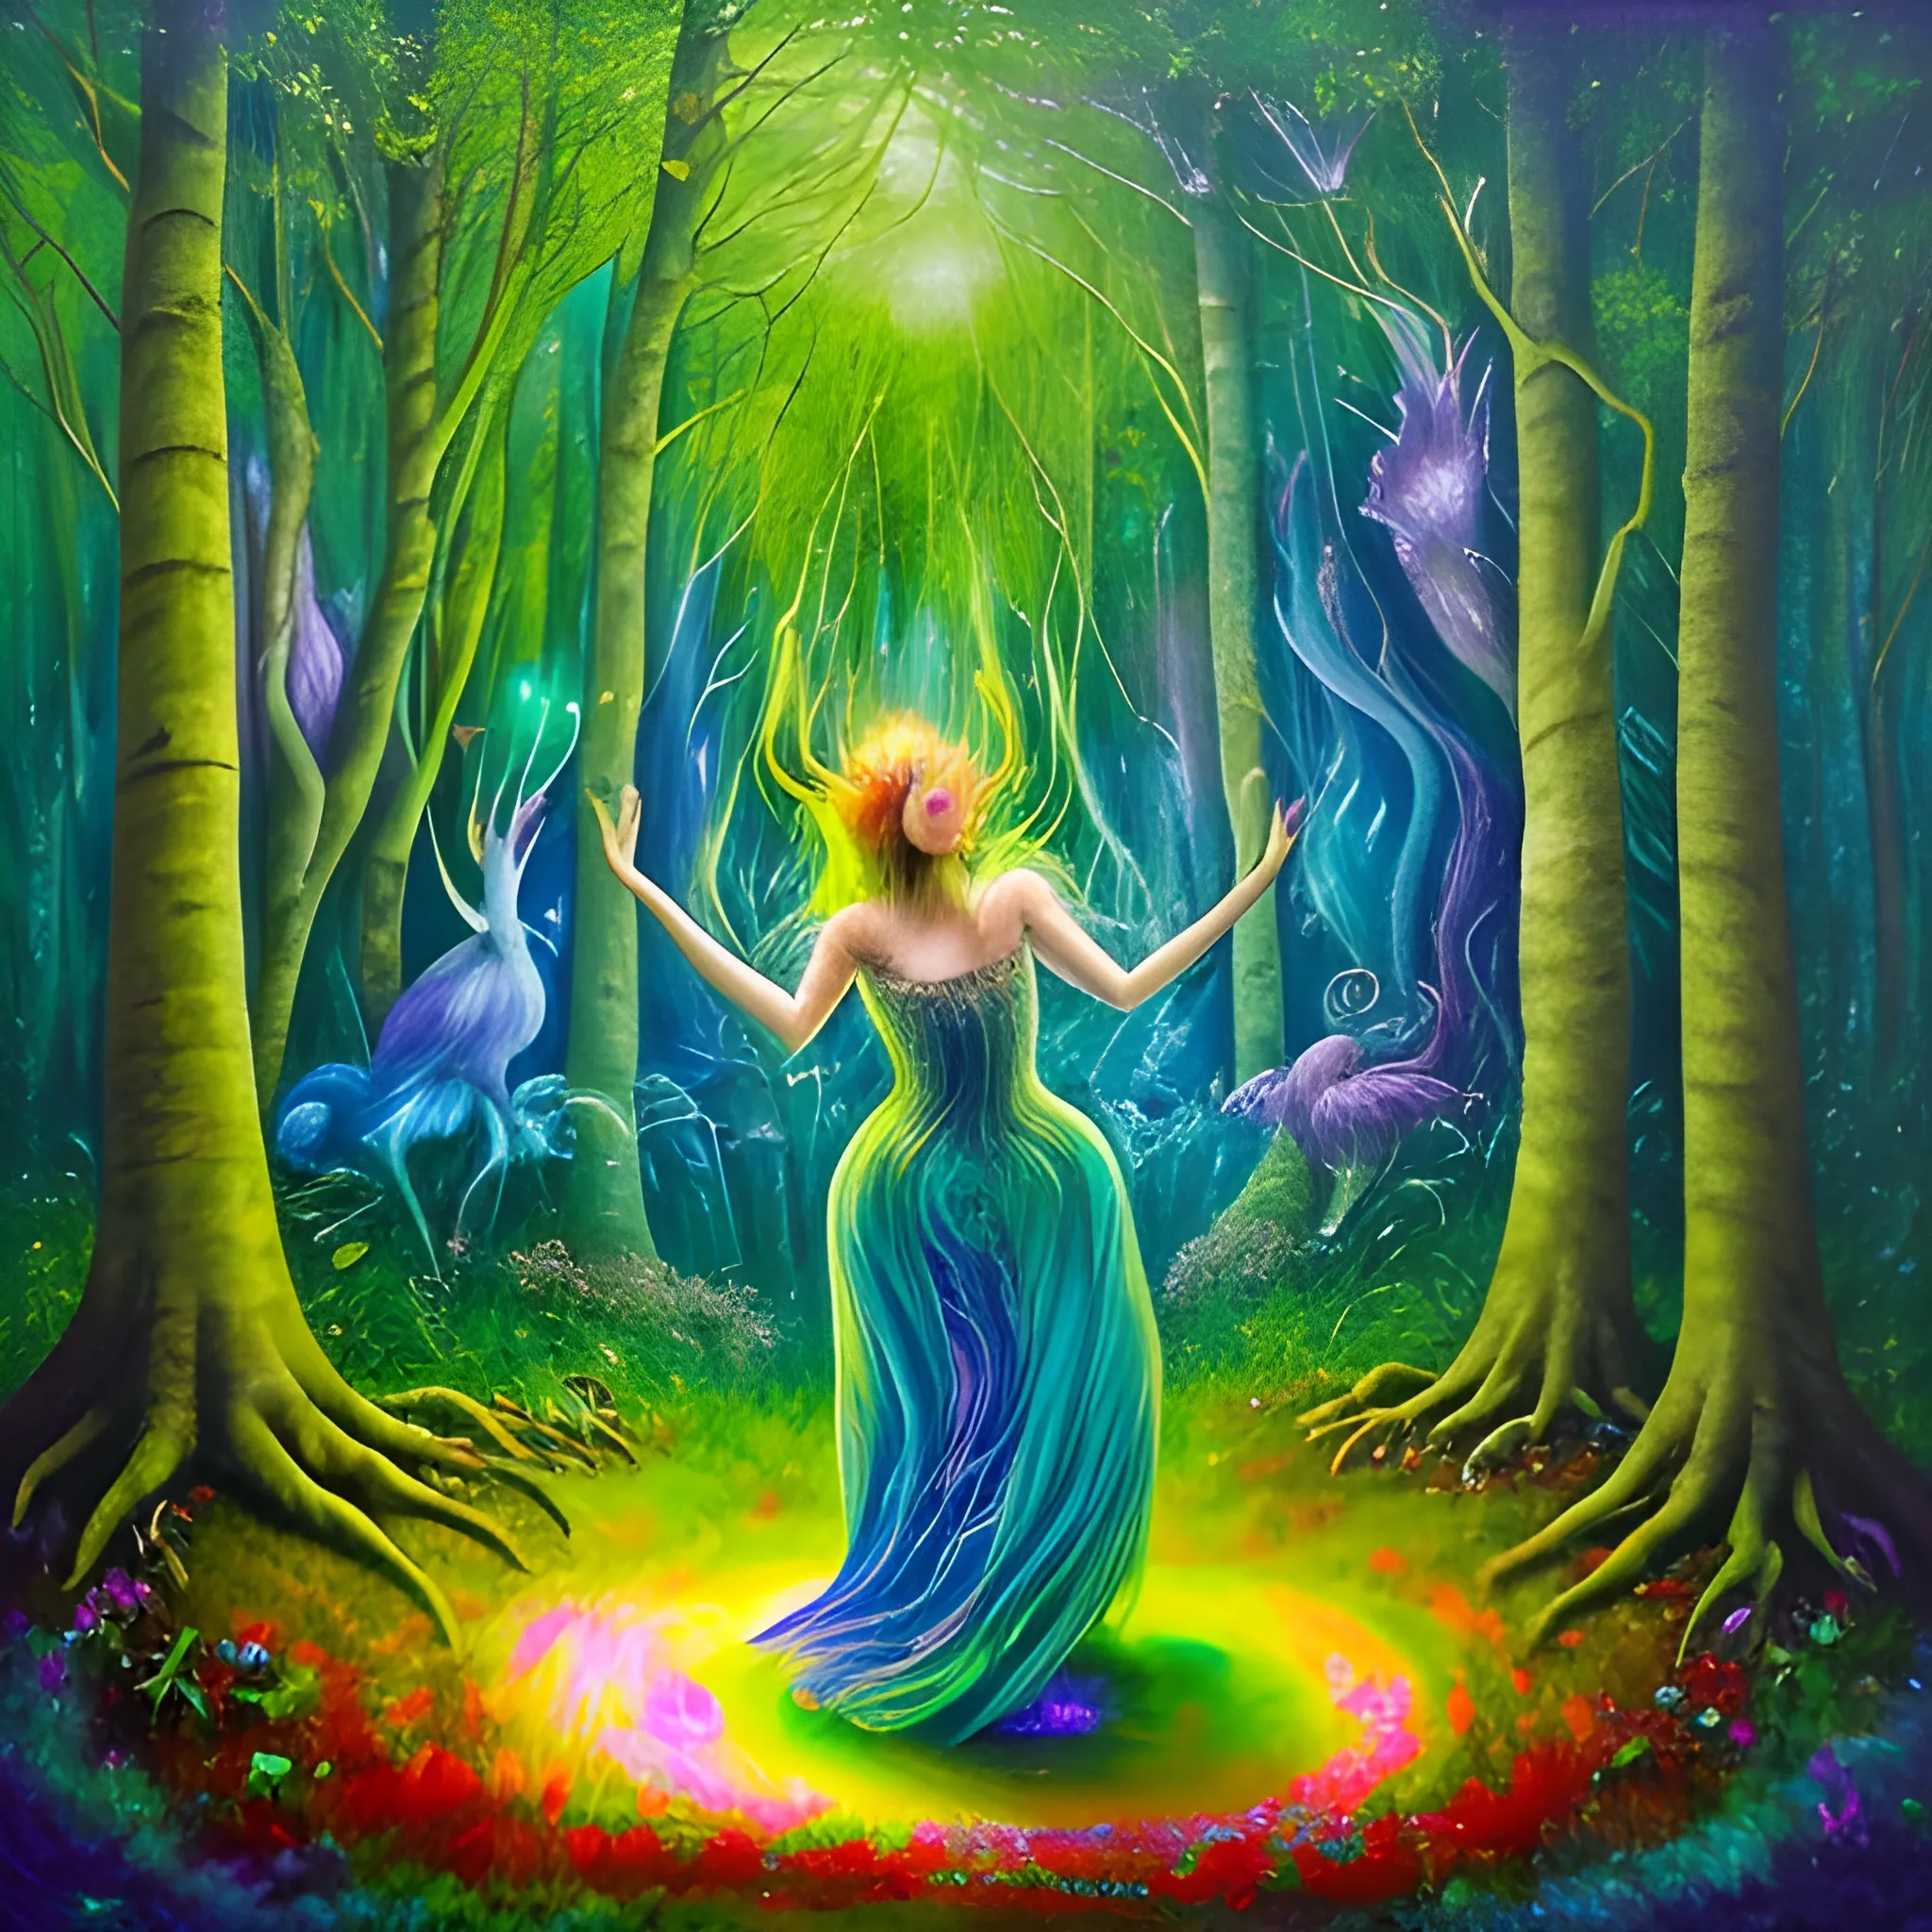 In the heart of the enchanted forest, the DJ conjures melodies that lure mythical creatures from hibernation. The drums' resounding pulse harmonizes with the whispers of trees, creating an otherworldly symphony. Lose yourself in nature's most mesmerizing dance., Oil Painting, Trippy, Water Color